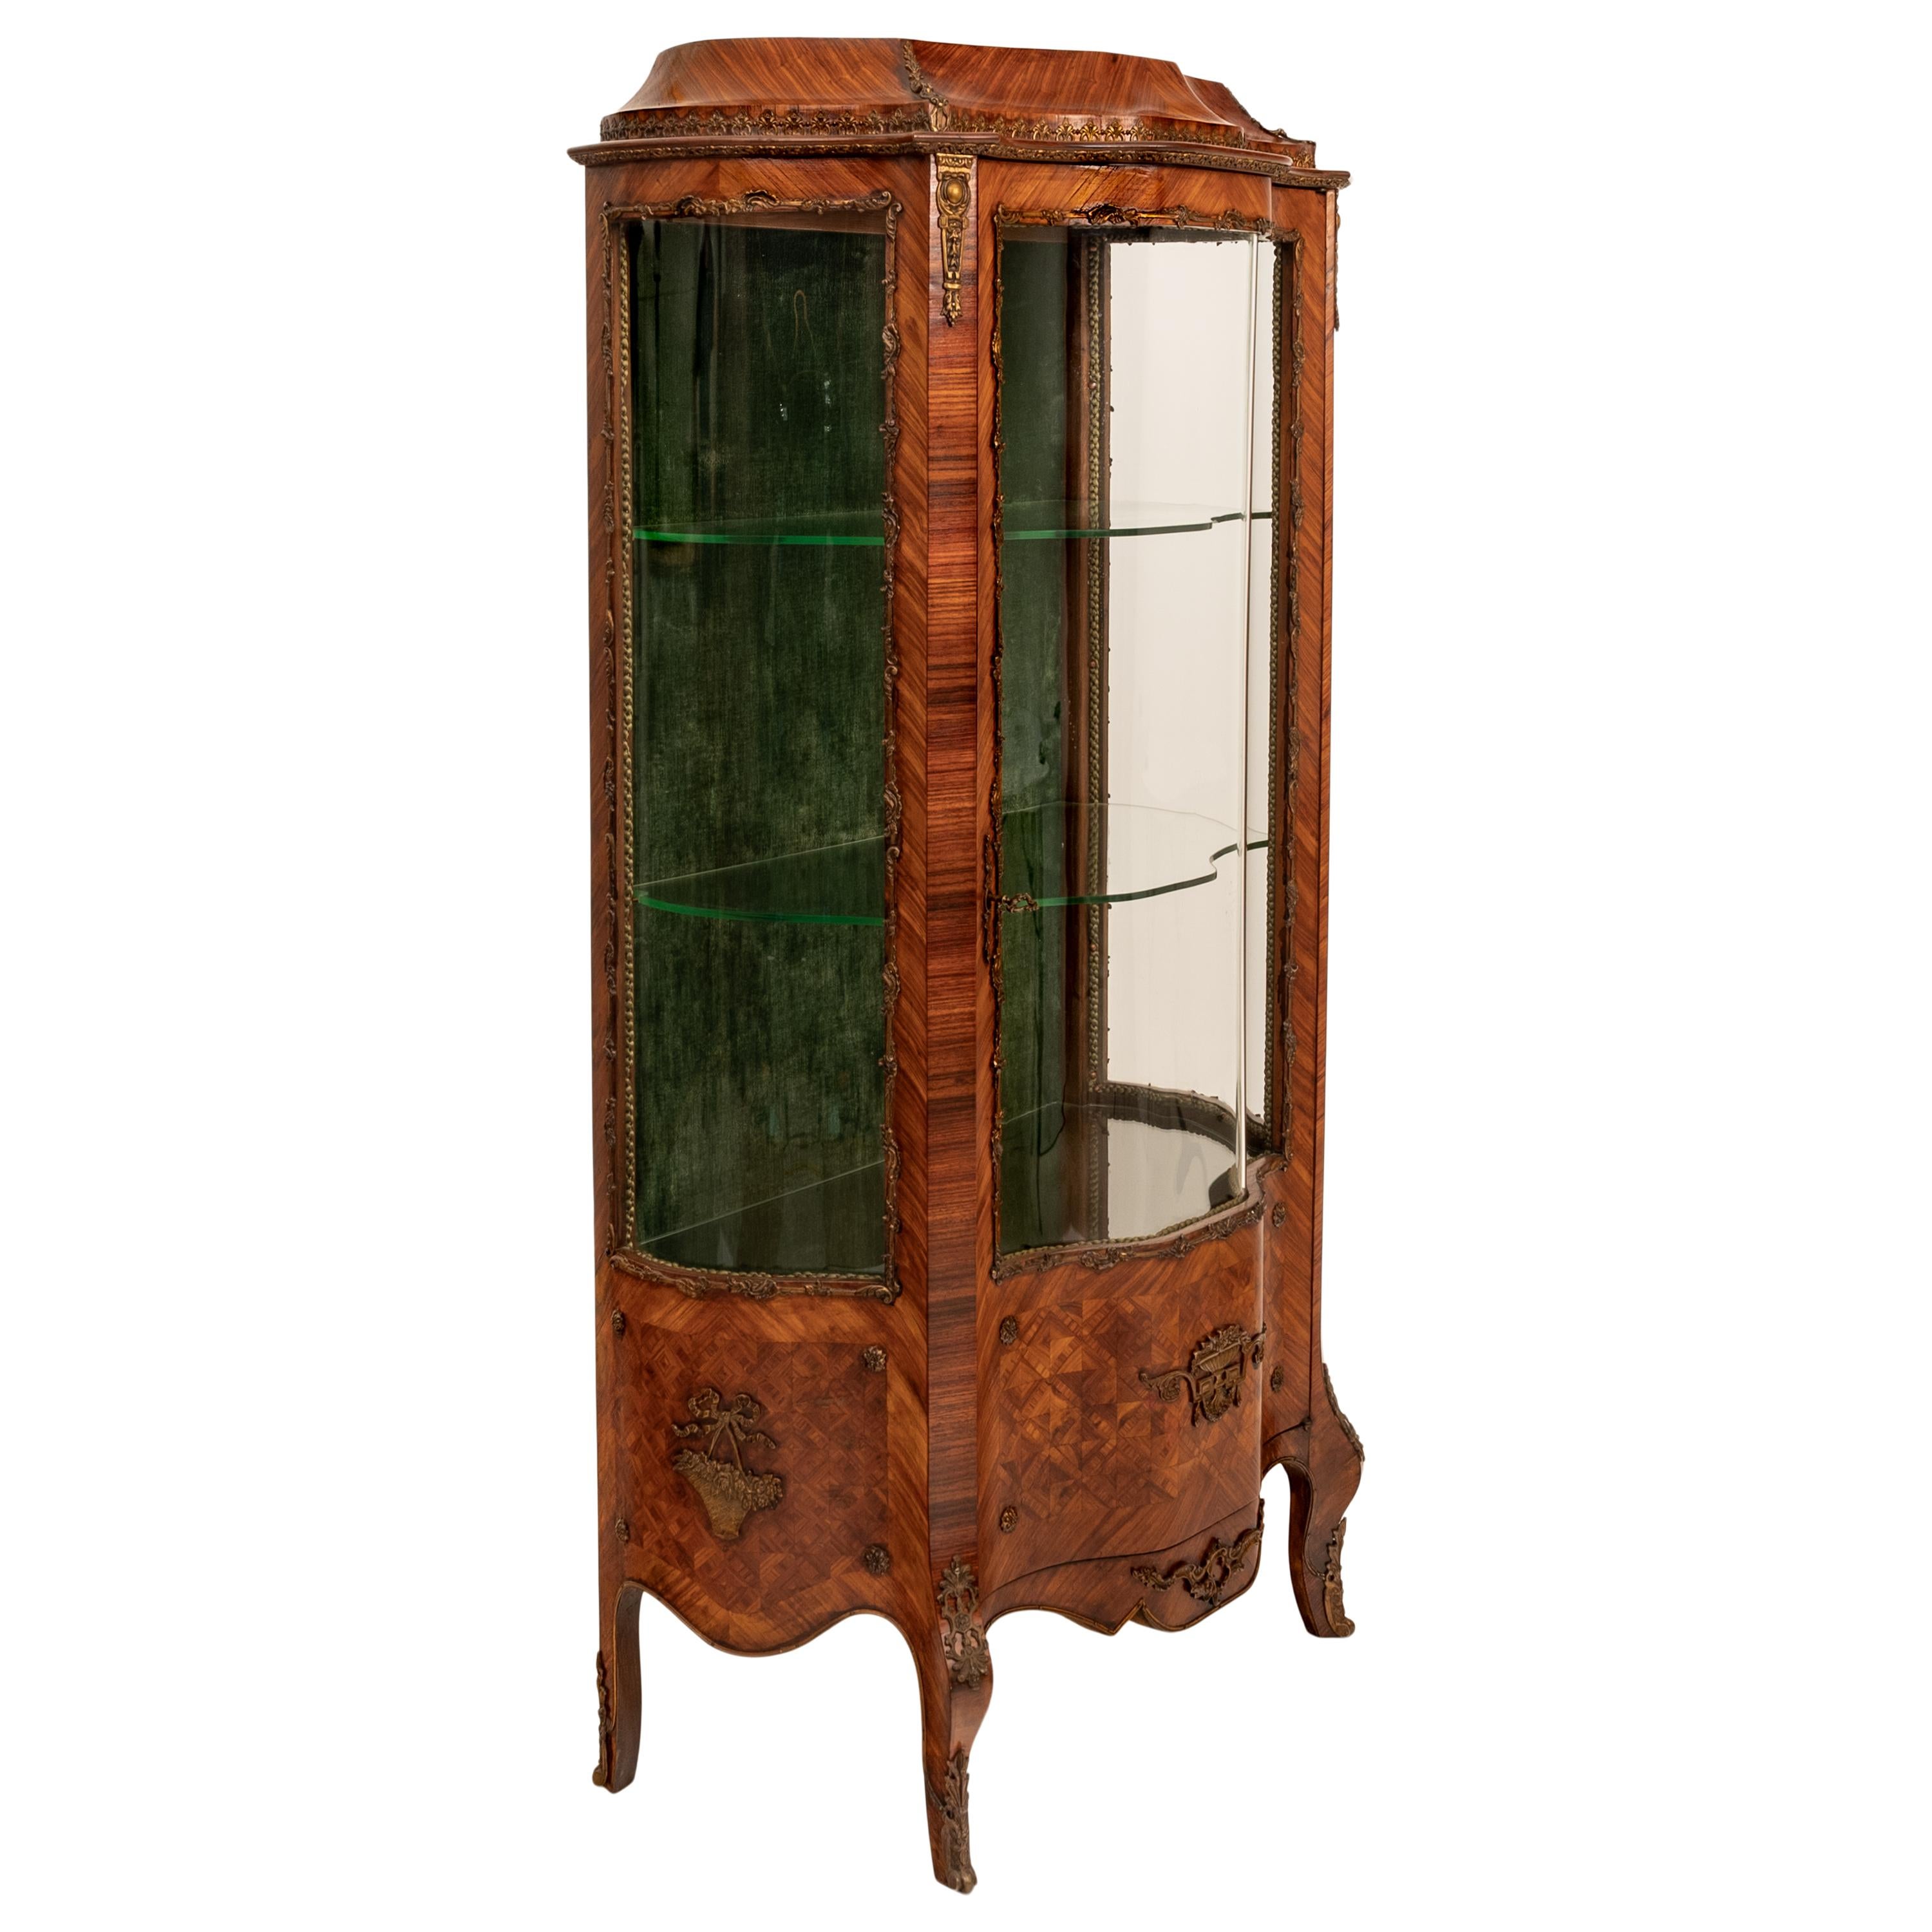 Fine Antique French Louis XV Kingwood Ormolu Bombe Shaped Marquetry Vitrine 1880 For Sale 2